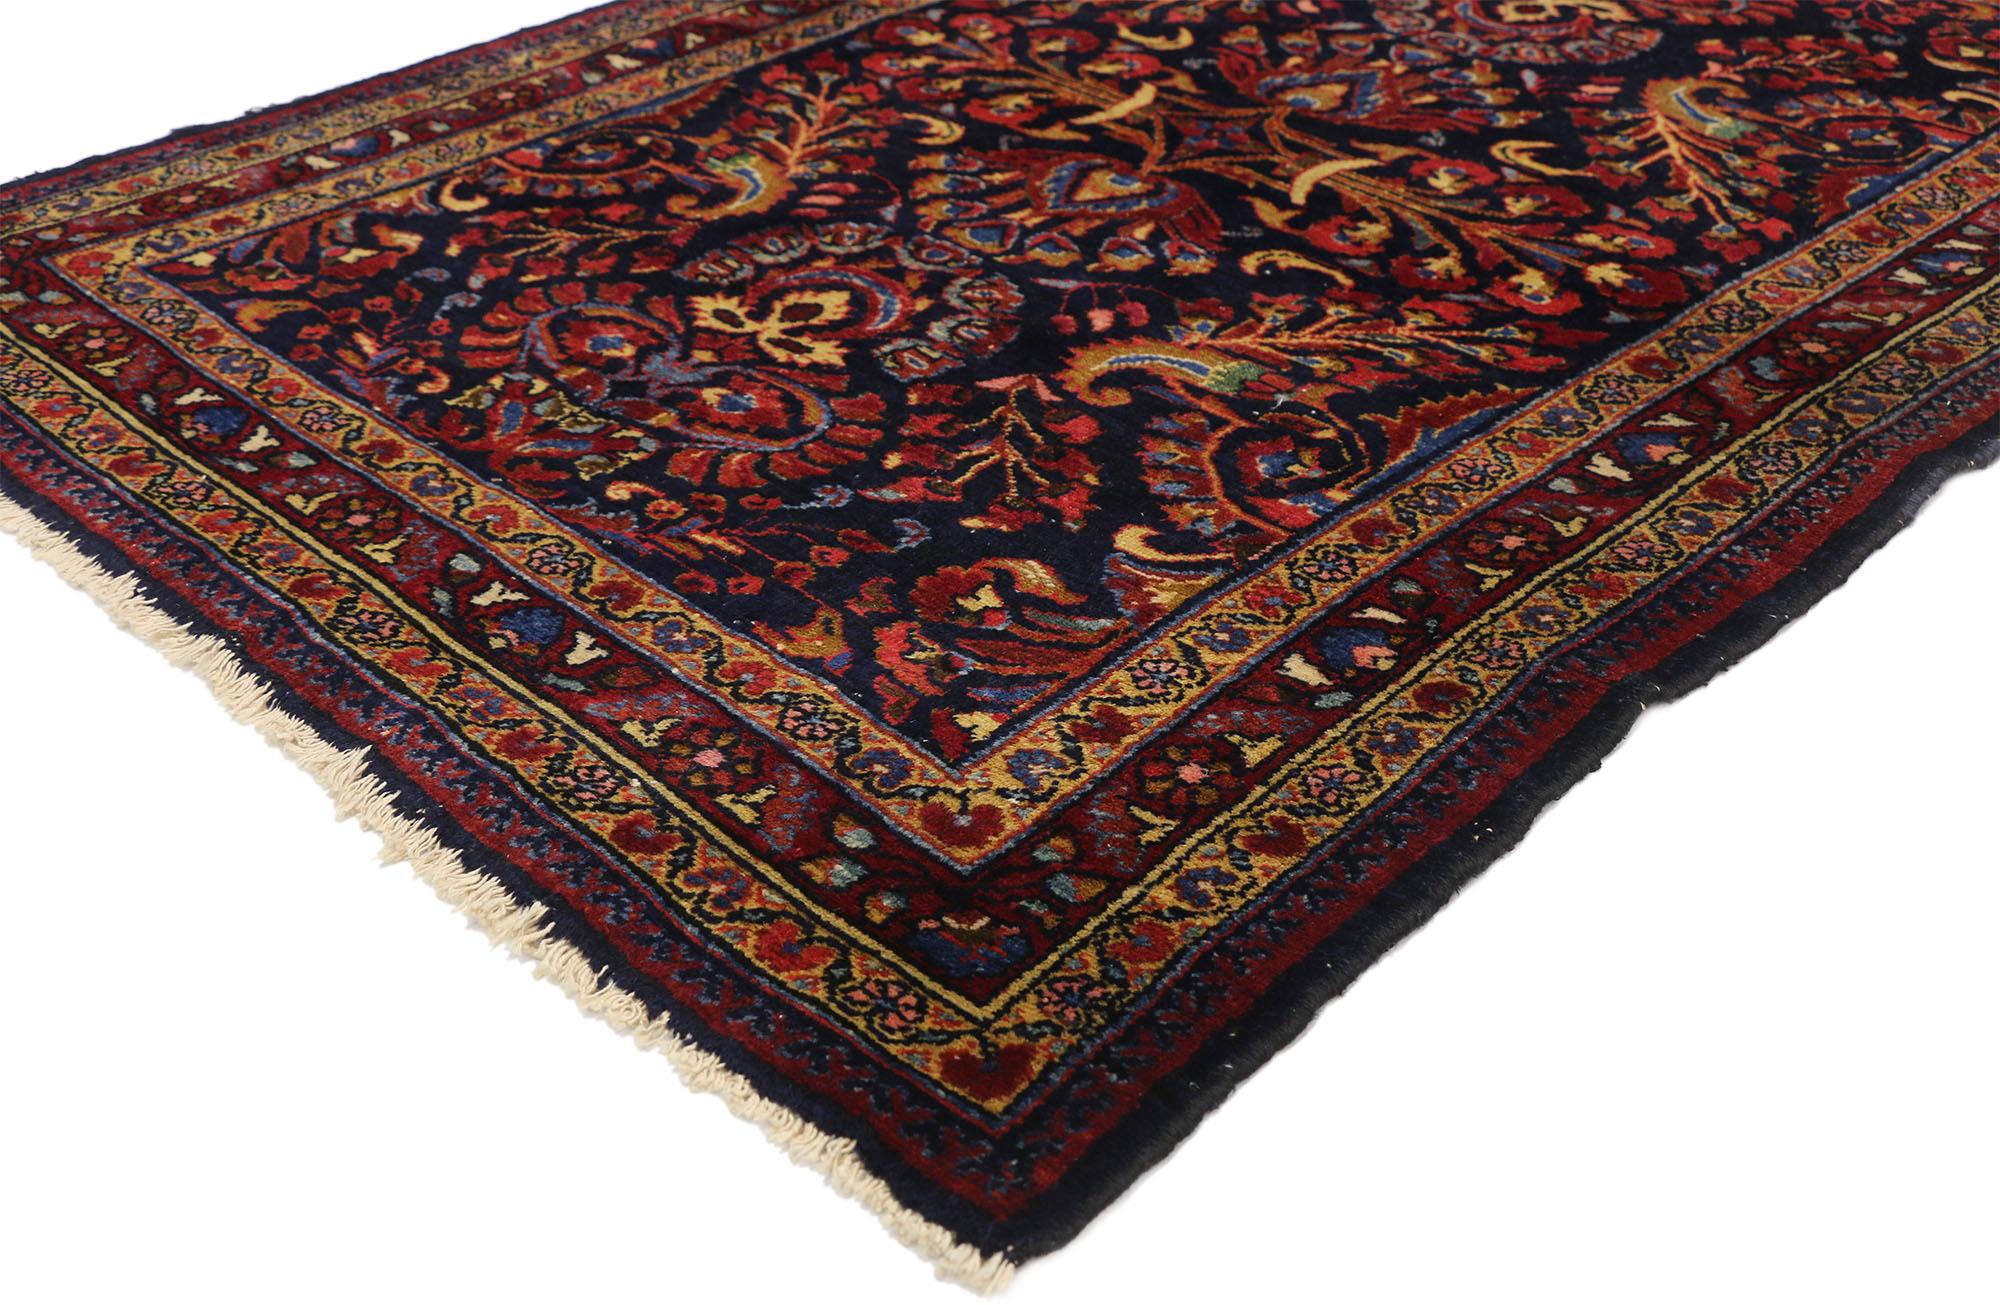 76857 Antique Persian Lilihan Accent rug with traditional floral motif. This ornate antique Persian Lilihan rug is rendered in deep sapphire blue, garnet red and cream on a luxurious field dotted with peacock hued lush flowers. Surrounded with a